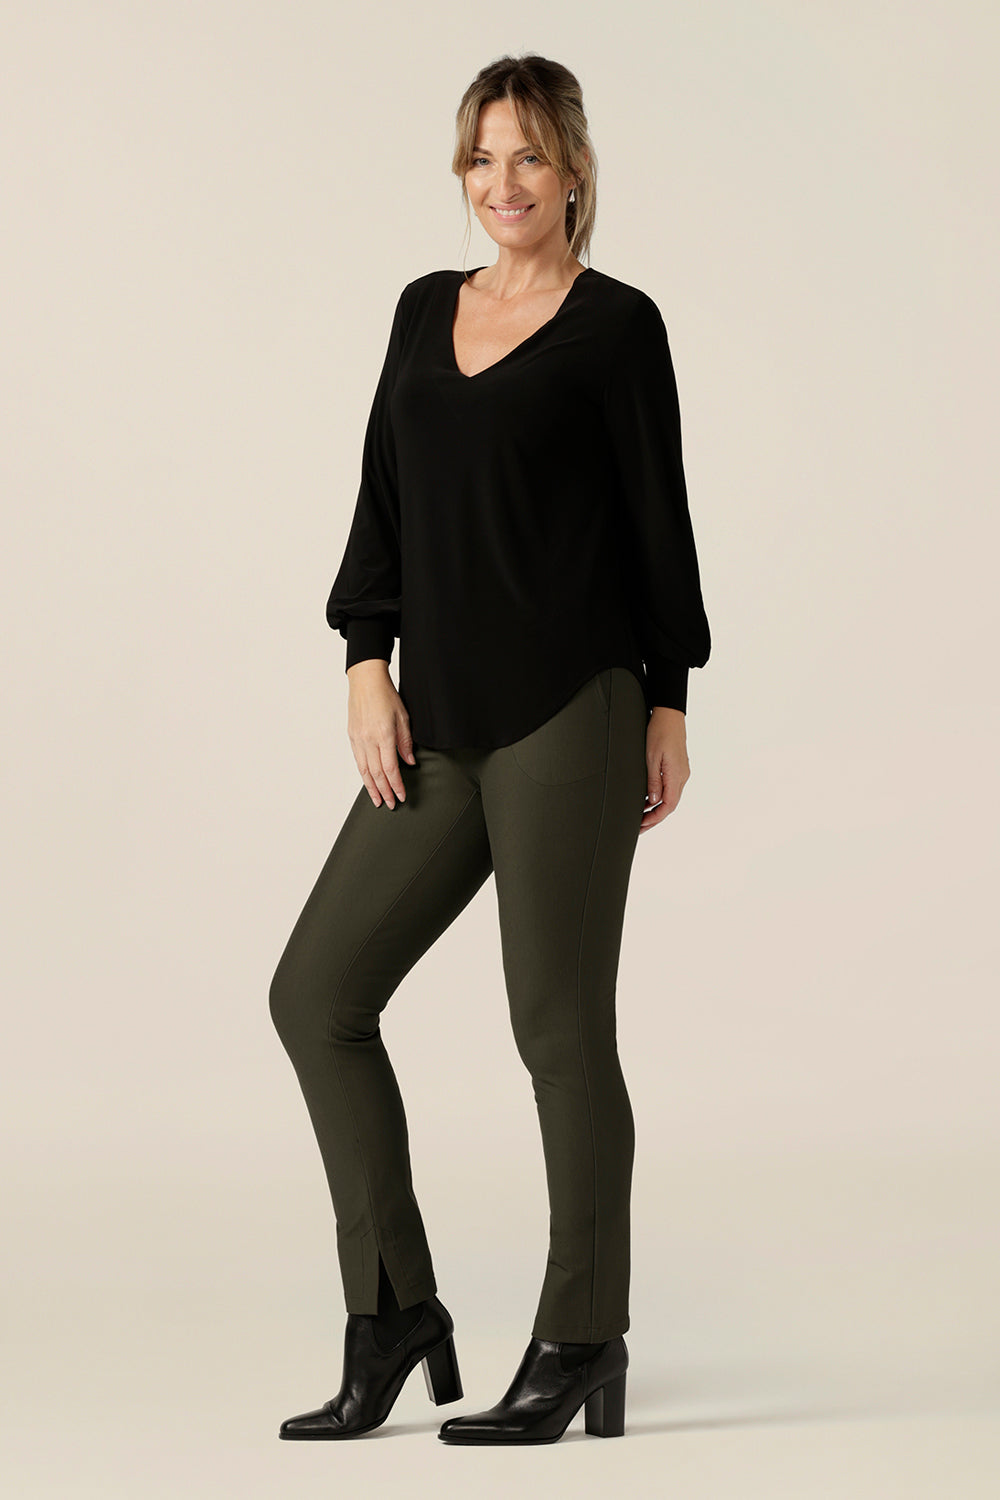 A size 10 woman wears a V-neck black top with long sleeves together with slim leg, olive green pants in stretch jersey. This long sleeved top features cuffs at the wrists and a shirttail hemline. Made in Australia by Australian and New Zealand women's clothing label, L&F.